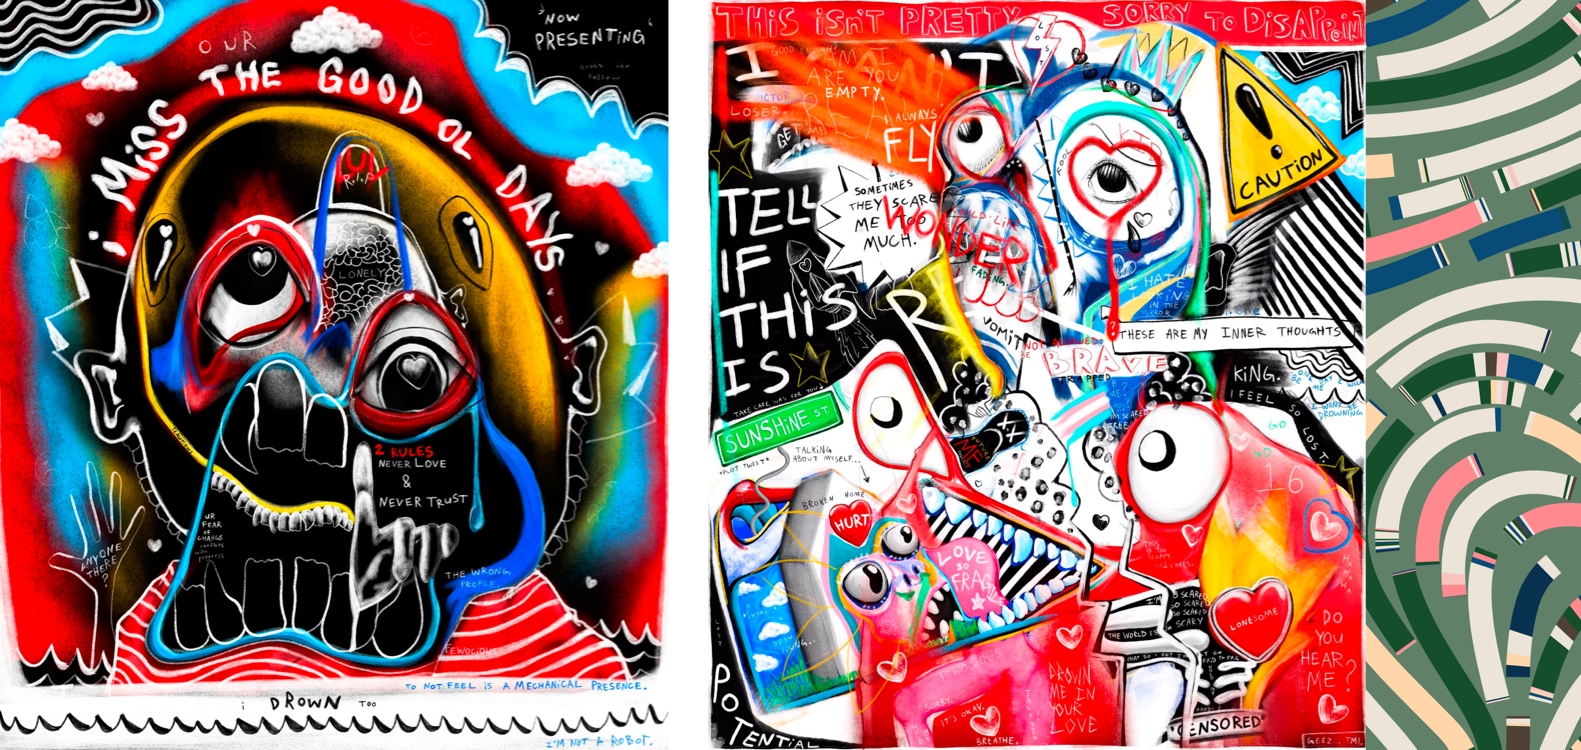 'I miss the good ol' days' and 'Story about a scared kid named Victor' by FEWOCiOUS, both auctioned off by Christie's